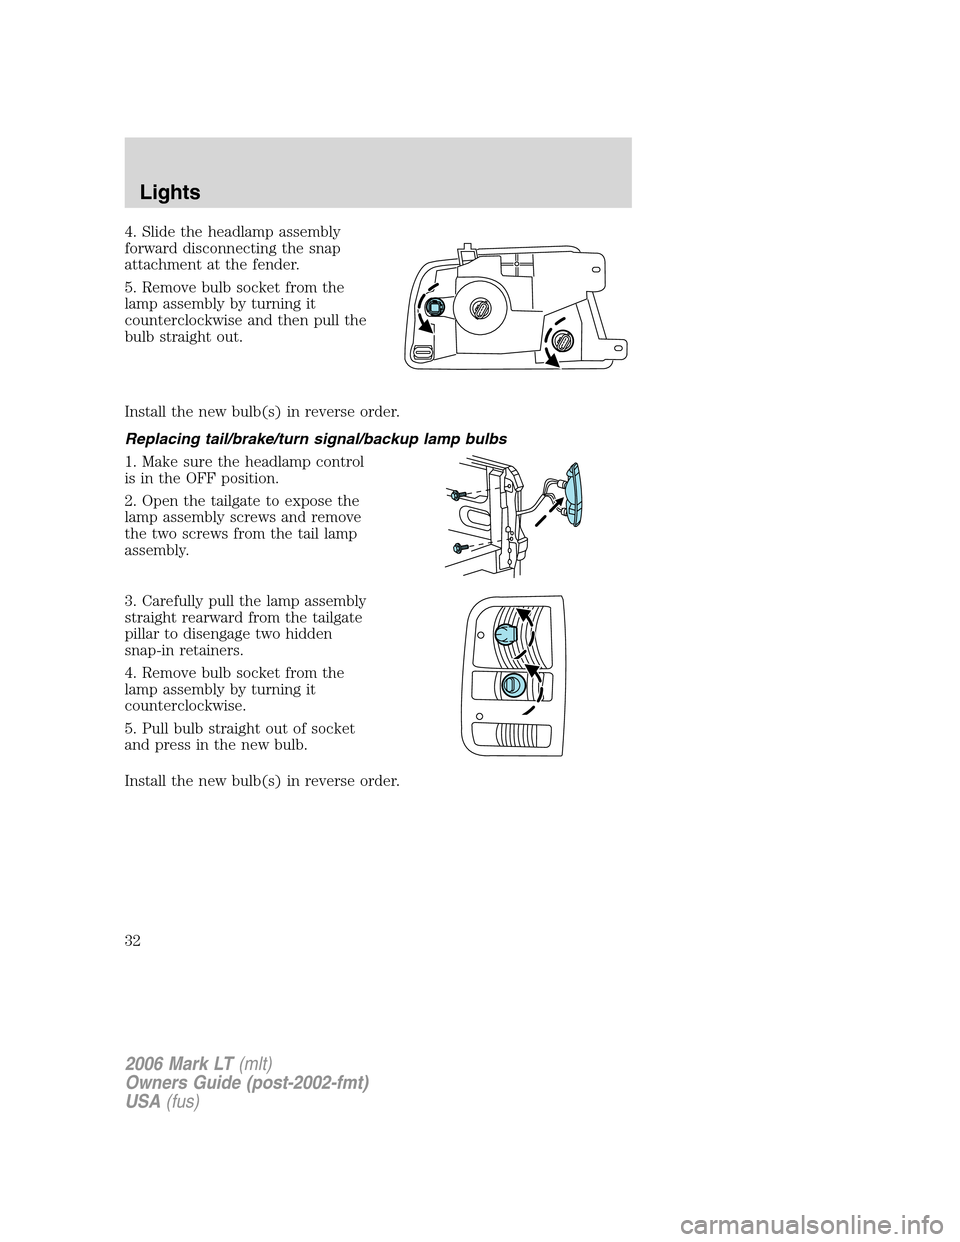 LINCOLN MARK LT 2006  Owners Manual 4. Slide the headlamp assembly
forward disconnecting the snap
attachment at the fender.
5. Remove bulb socket from the
lamp assembly by turning it
counterclockwise and then pull the
bulb straight out.